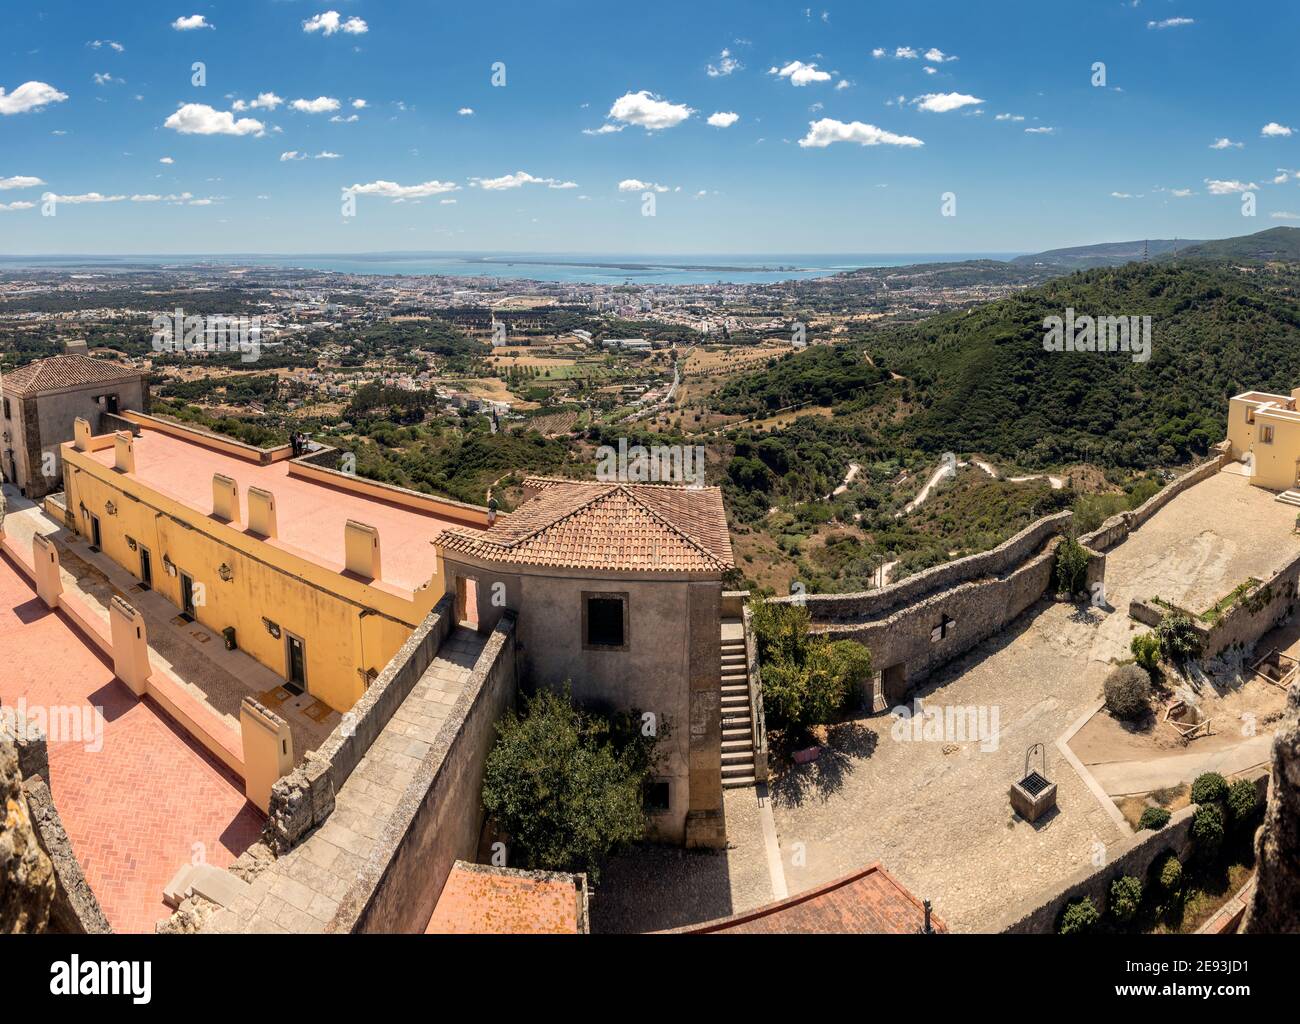 Panoramic view of the Palmela castle, in Portugal, with the city of Setúbal, the Sado river, and the peninsula of Troia in the background. Stock Photo